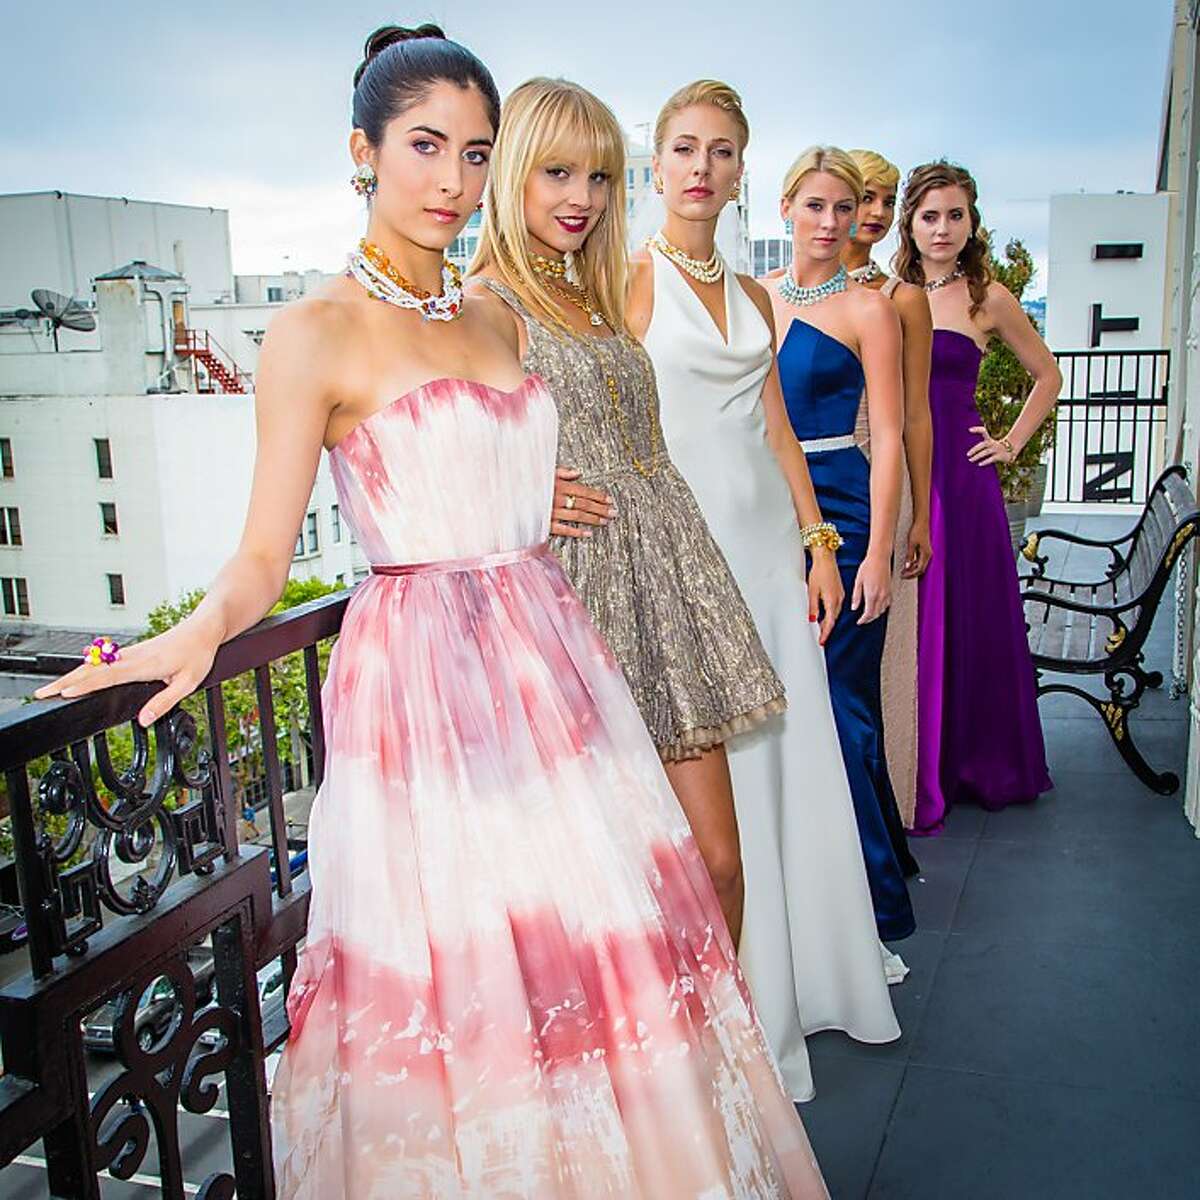 The Factory debuted its new eveningwear line with Britex with an intimate dinner at founder Jennifer Evans' Beaux Arts penthouse overlooking downtown San Francisco.